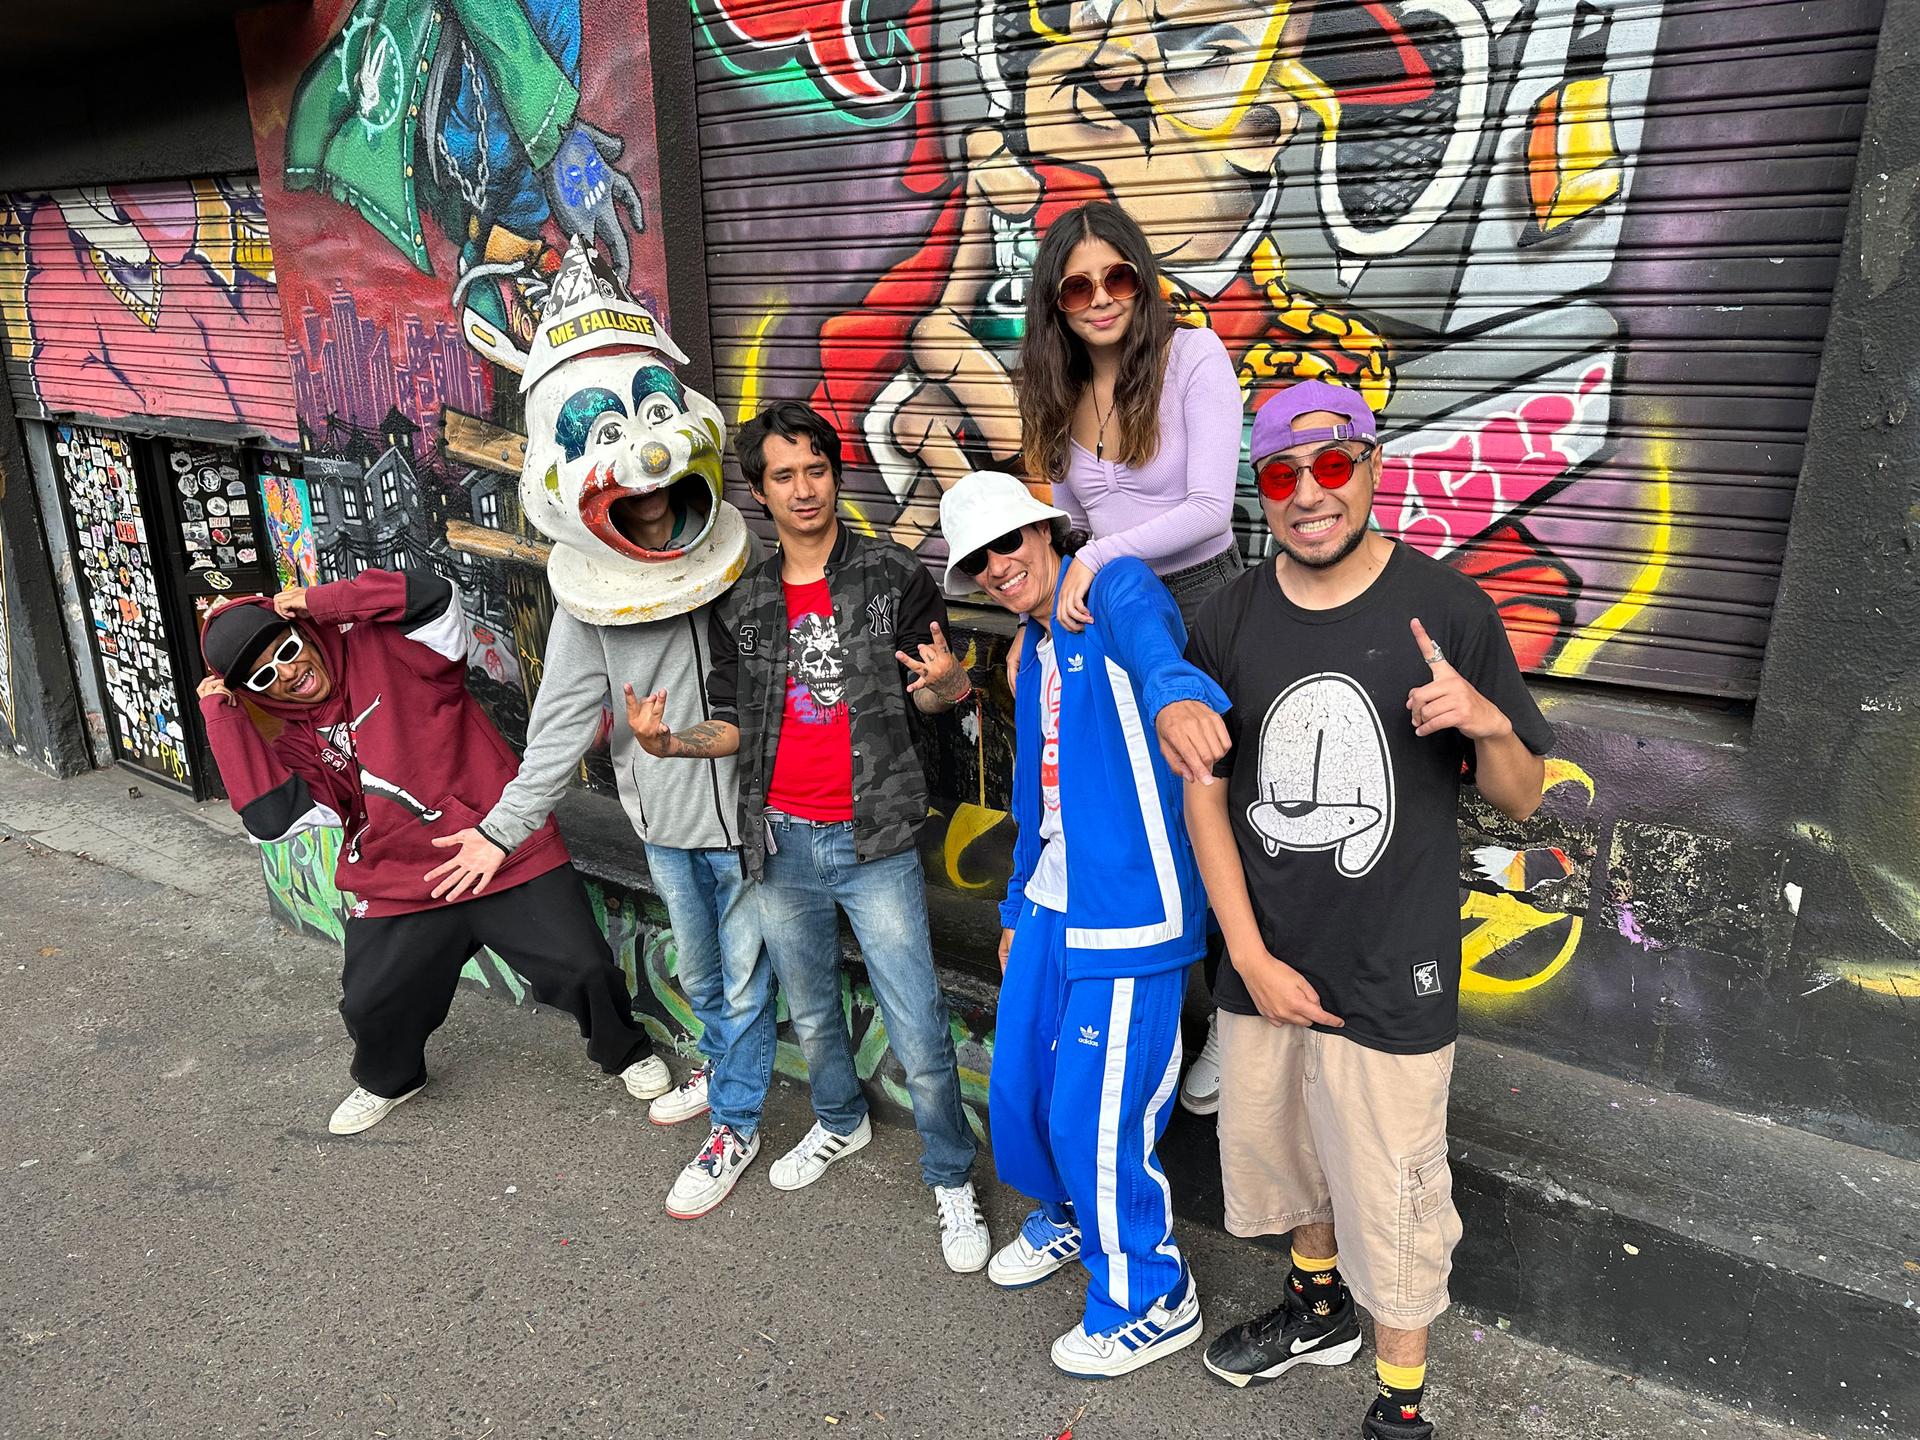 Paul Moposita (wearing blue tracksuit), his daughter Sisa and some of the members of Mugre Sur, a band he started more than 20 years ago.